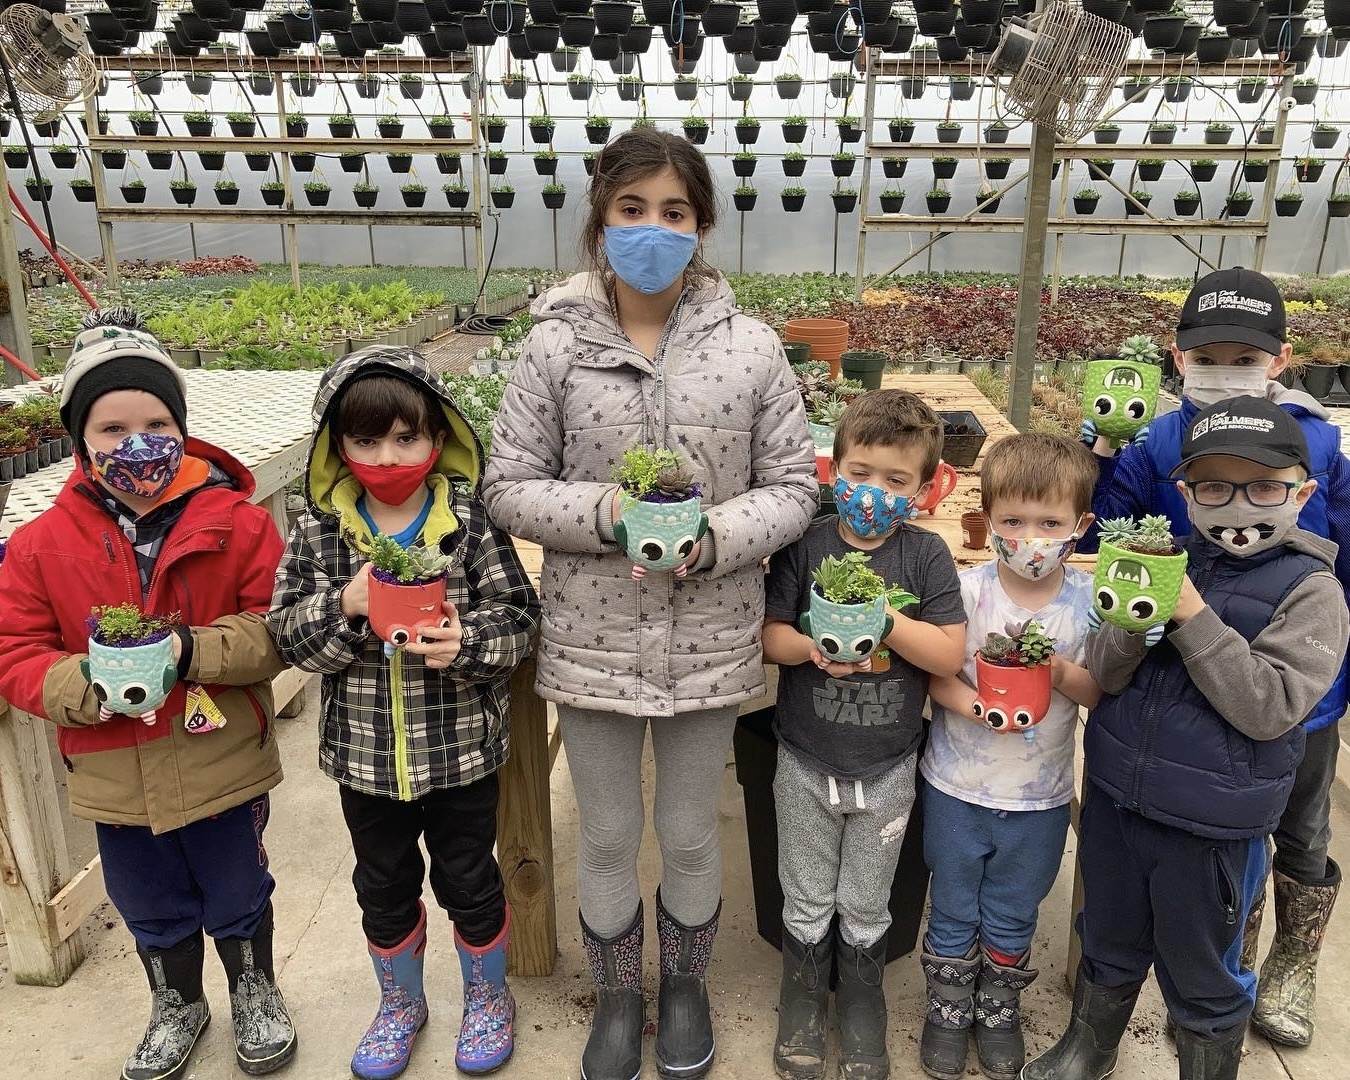 Children standing together showing their cute workshop plants.
